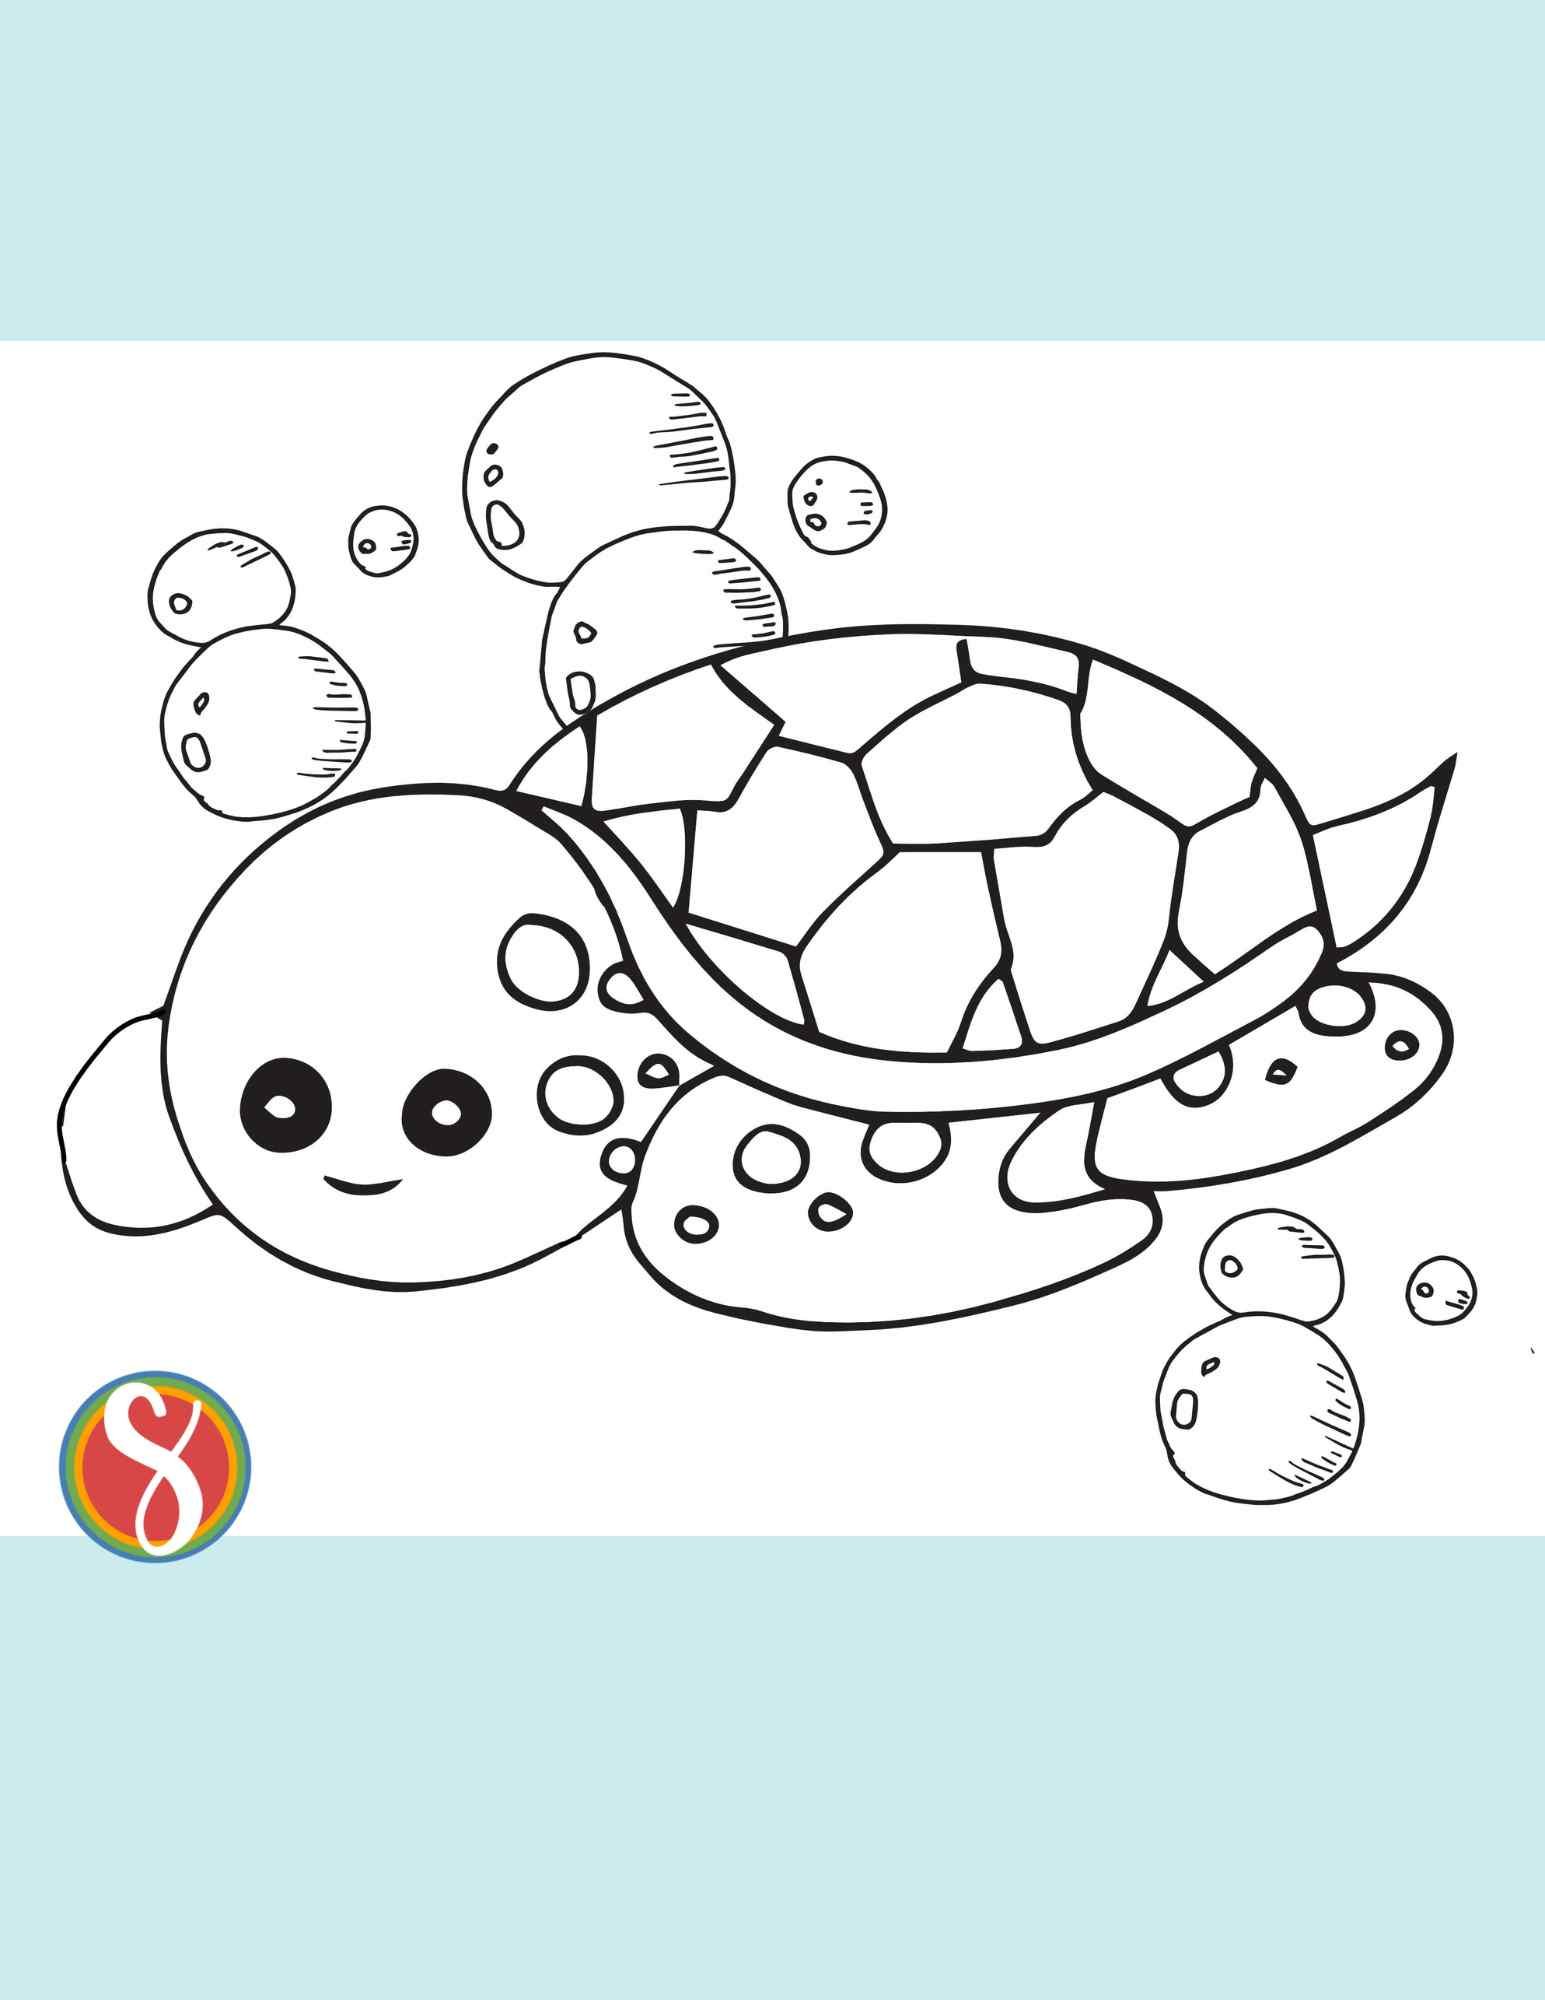 a simple, cartoonish turtle drawing coloring page with a background of bubbles